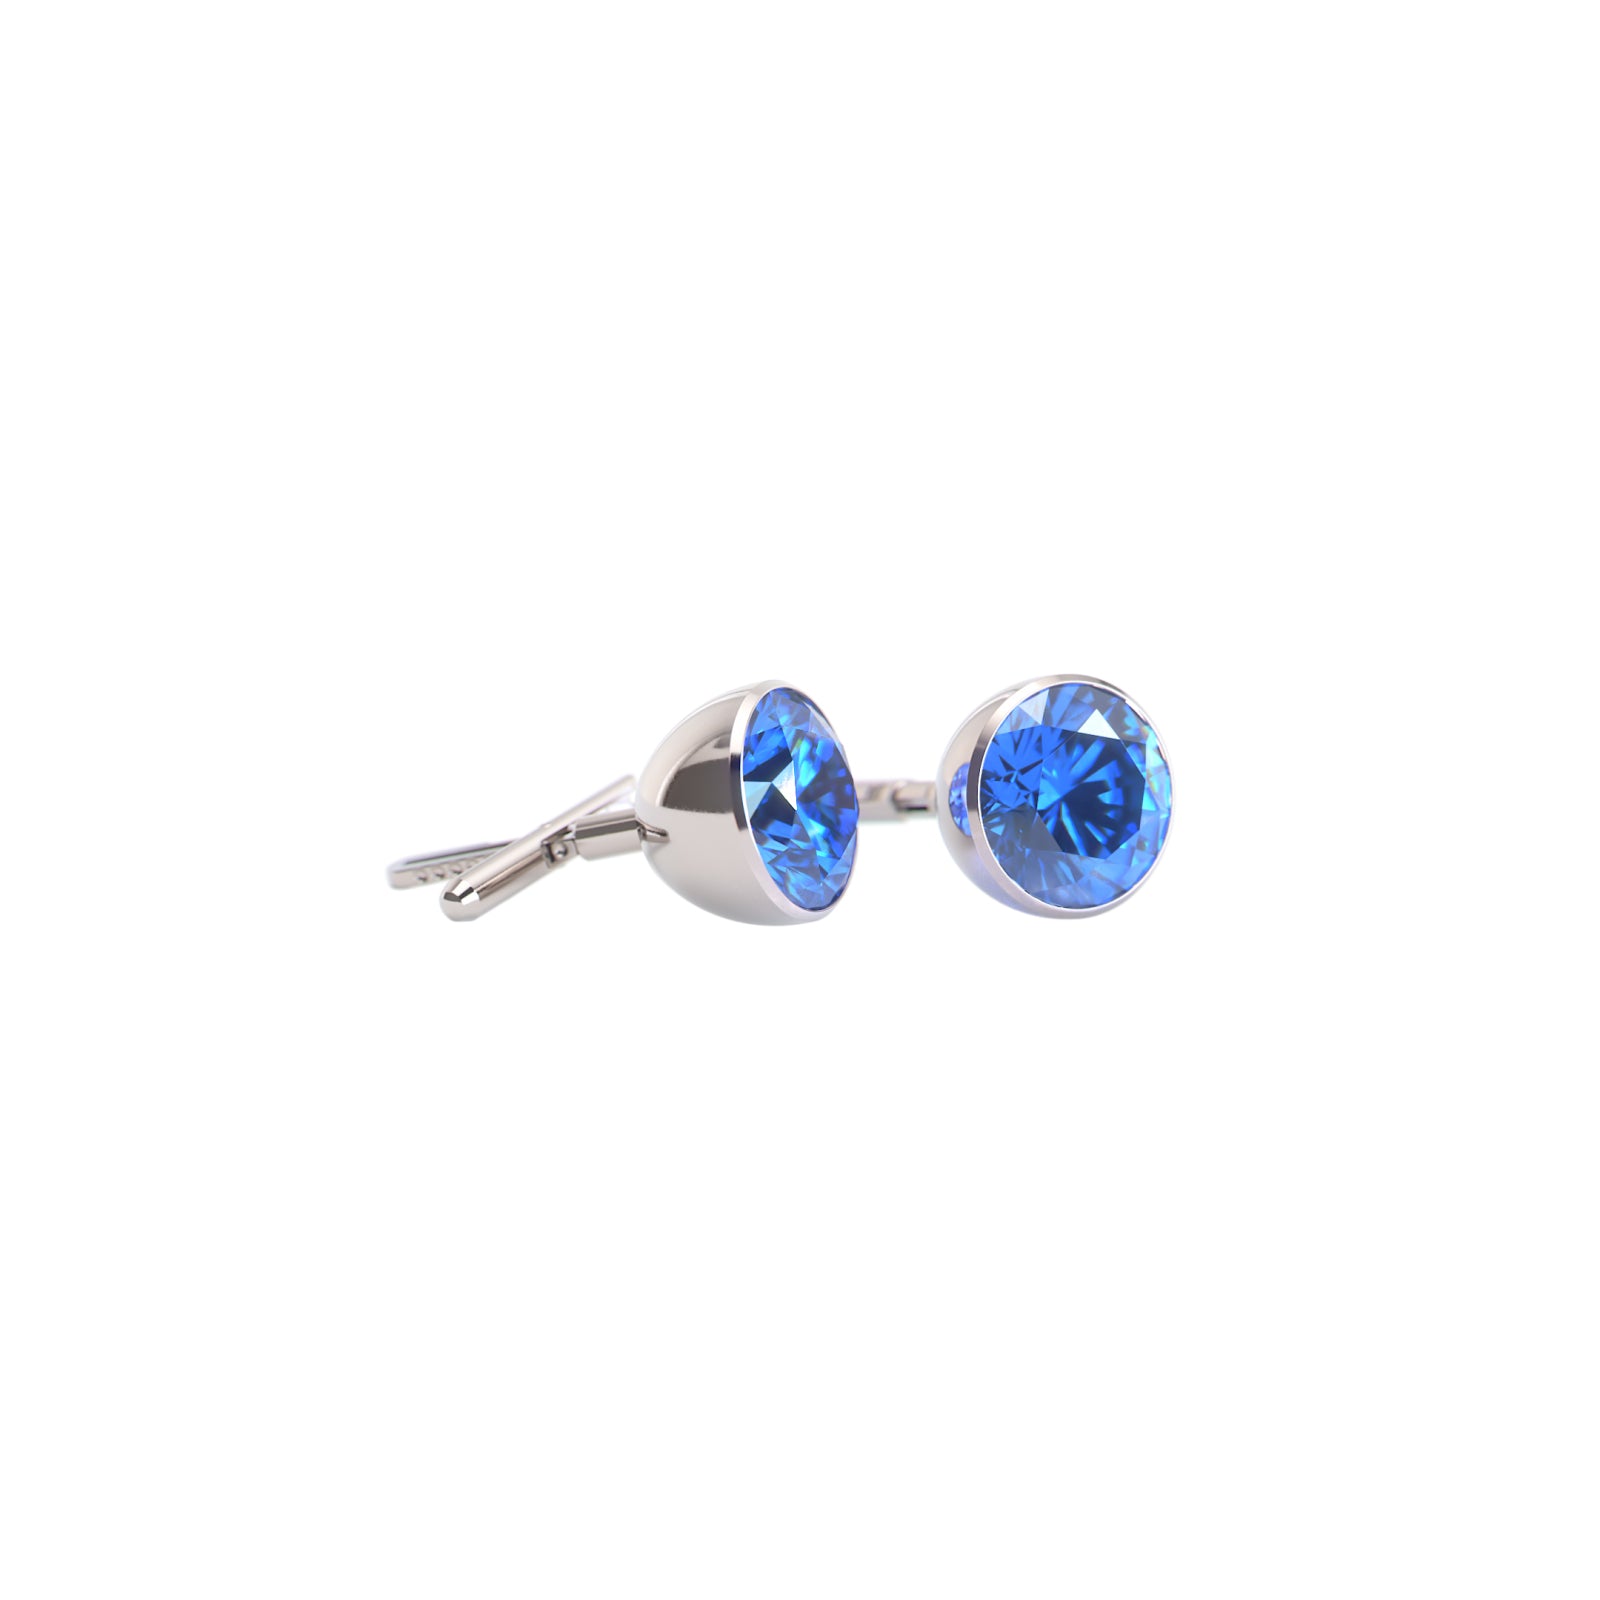 Clarity Blue 5.0mm